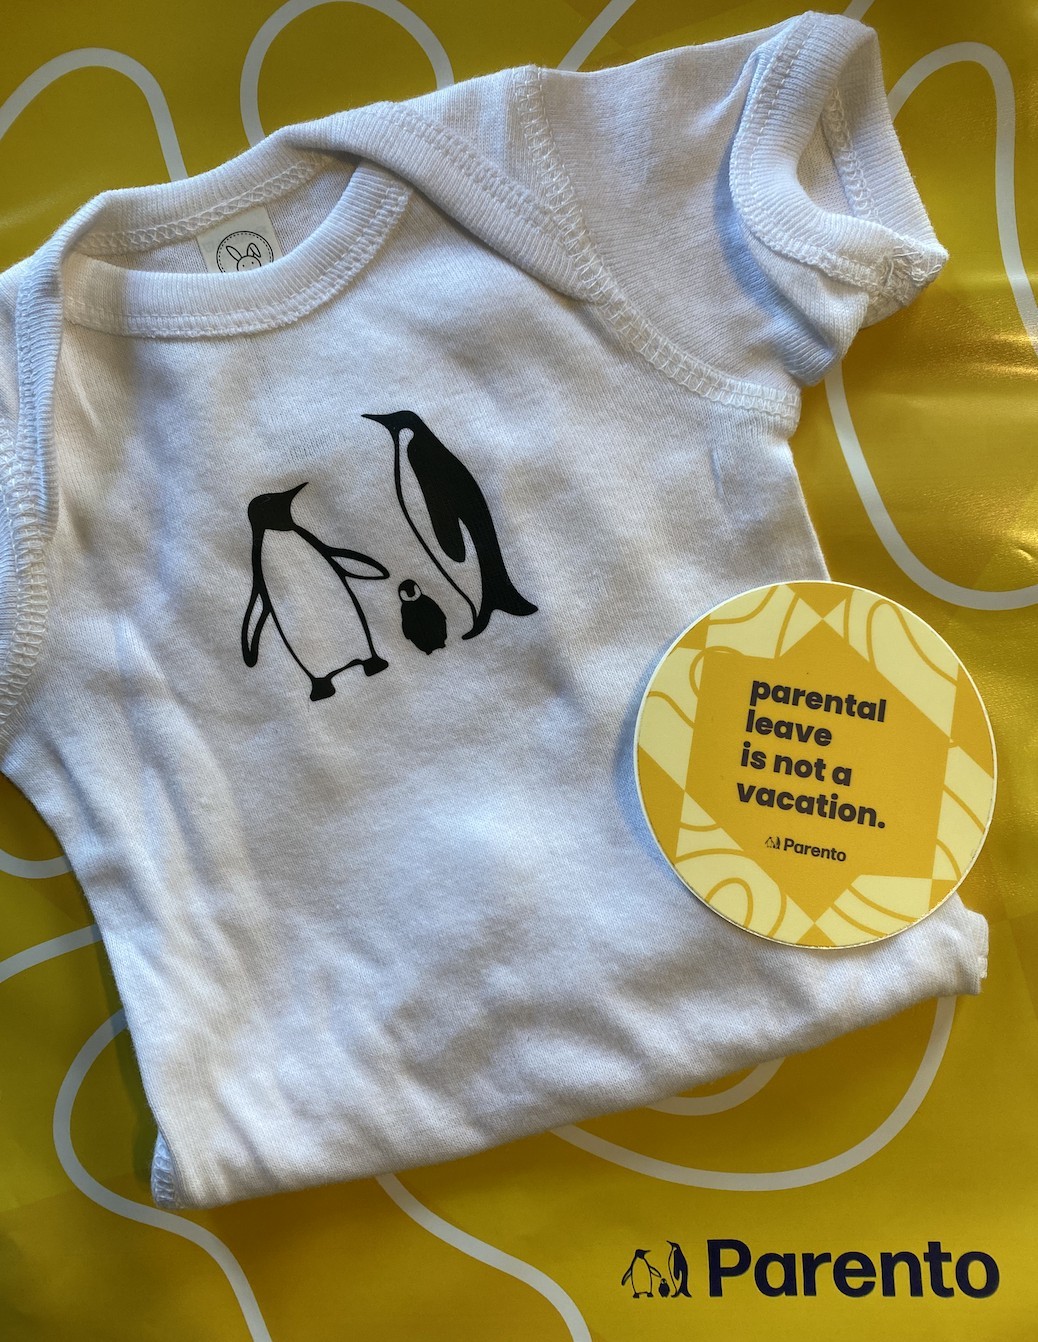 Parento sends care packages to parents on leave, including onesies, stickers, penguin plush, pins, teas, and more! 